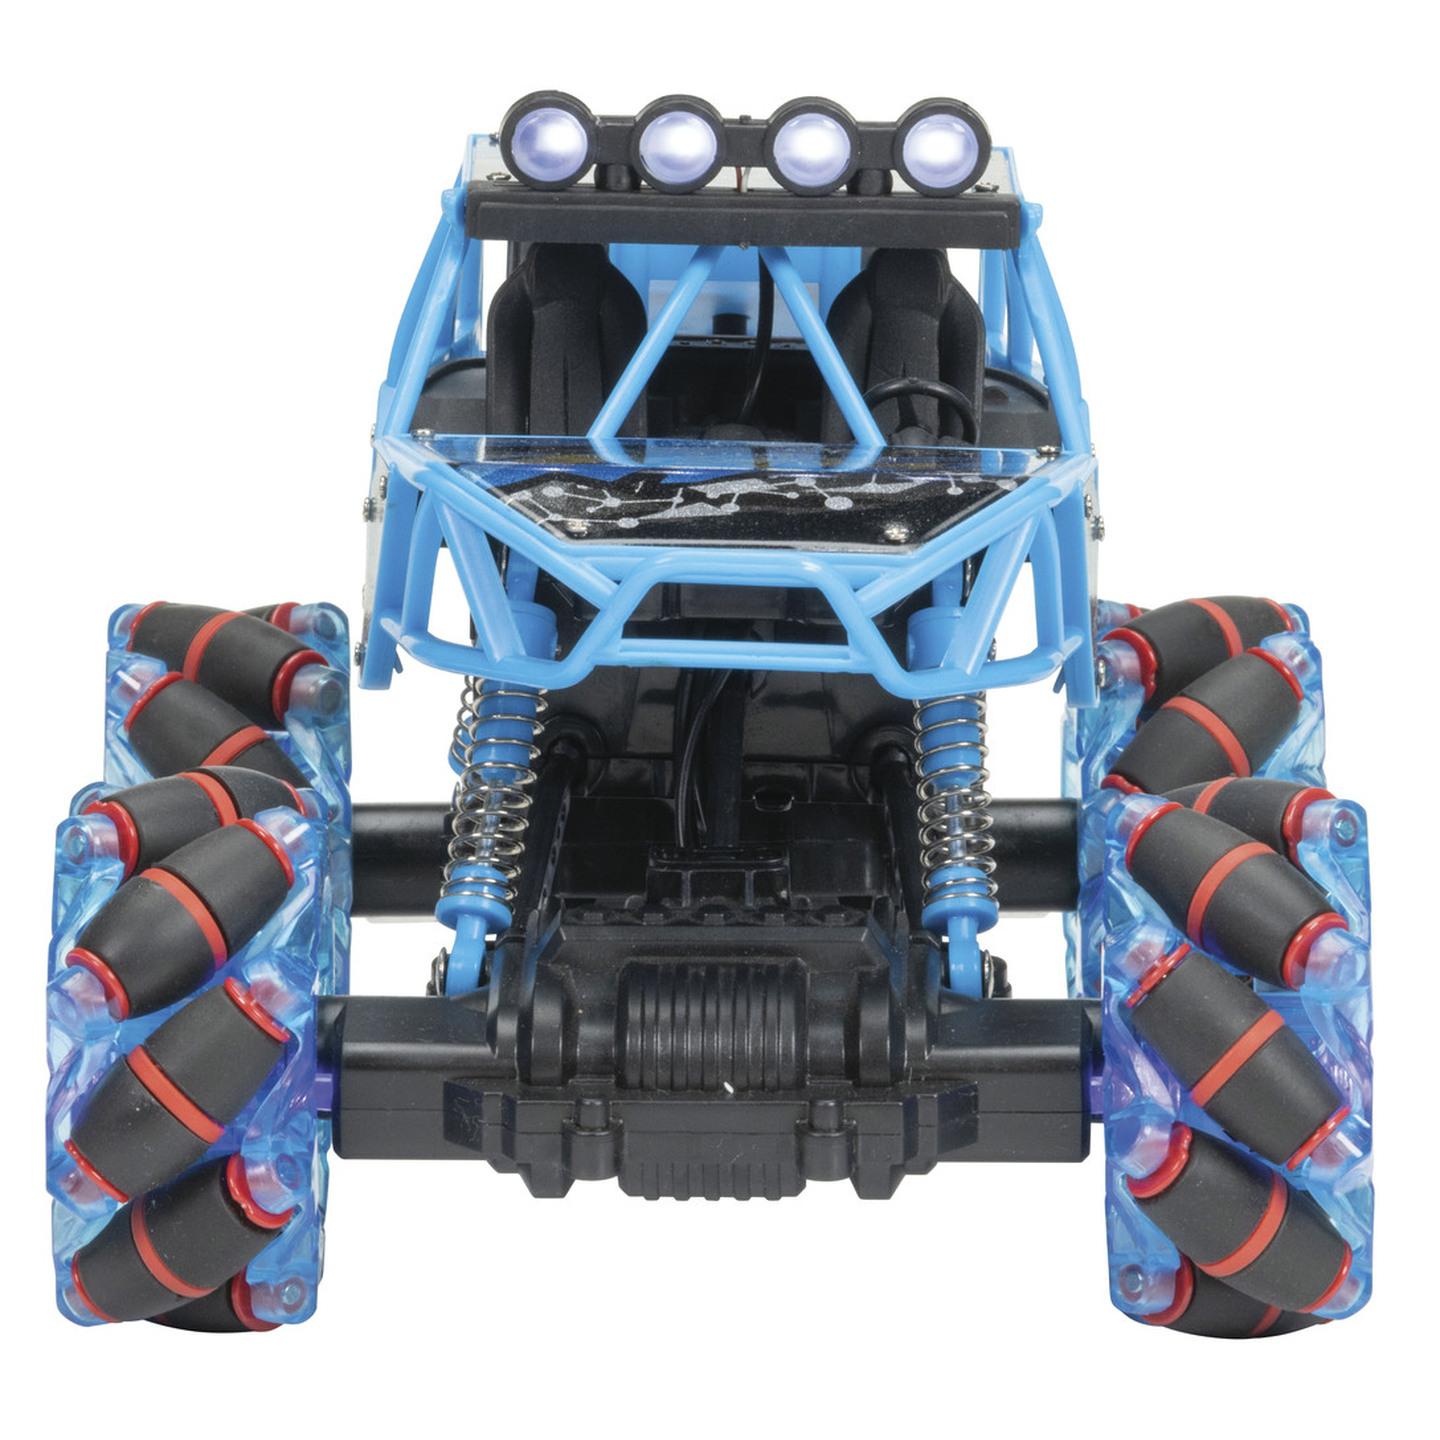 1:16 Scale R/C Rock Crawler with LEDs